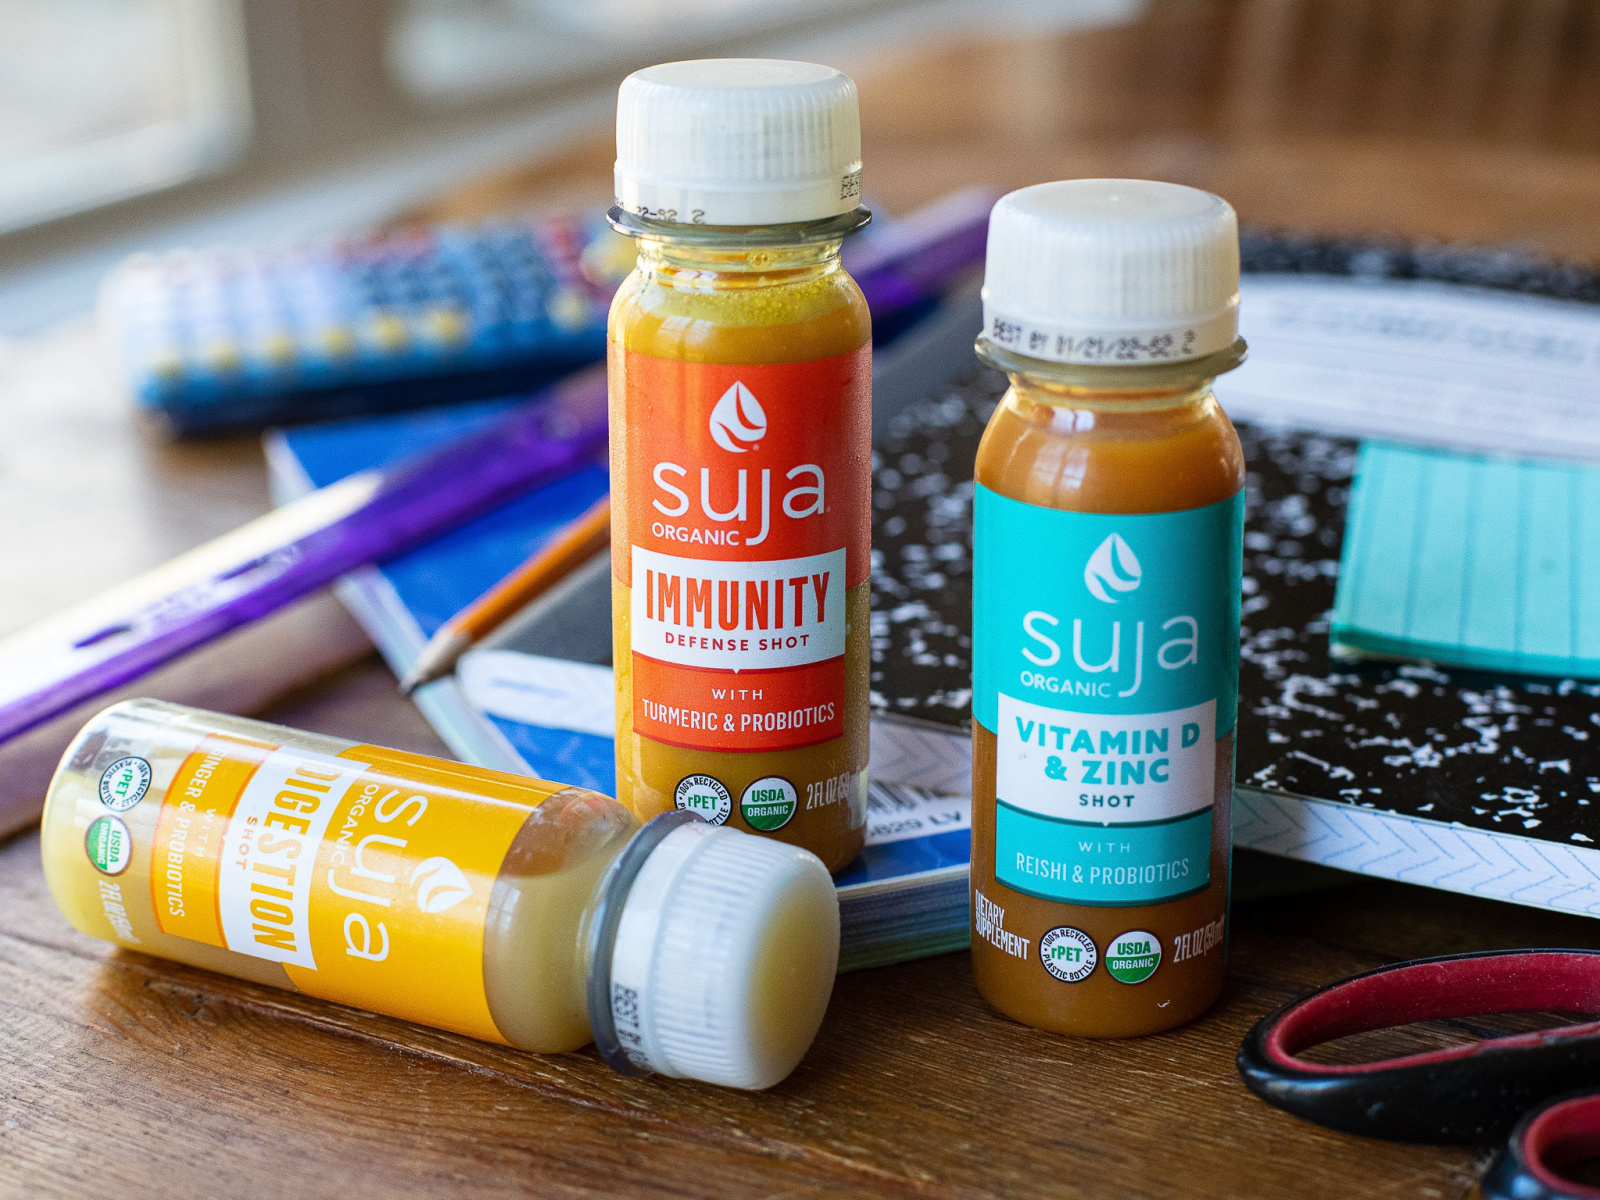 Get Suja Organic Shot For Just 50¢ At Publix